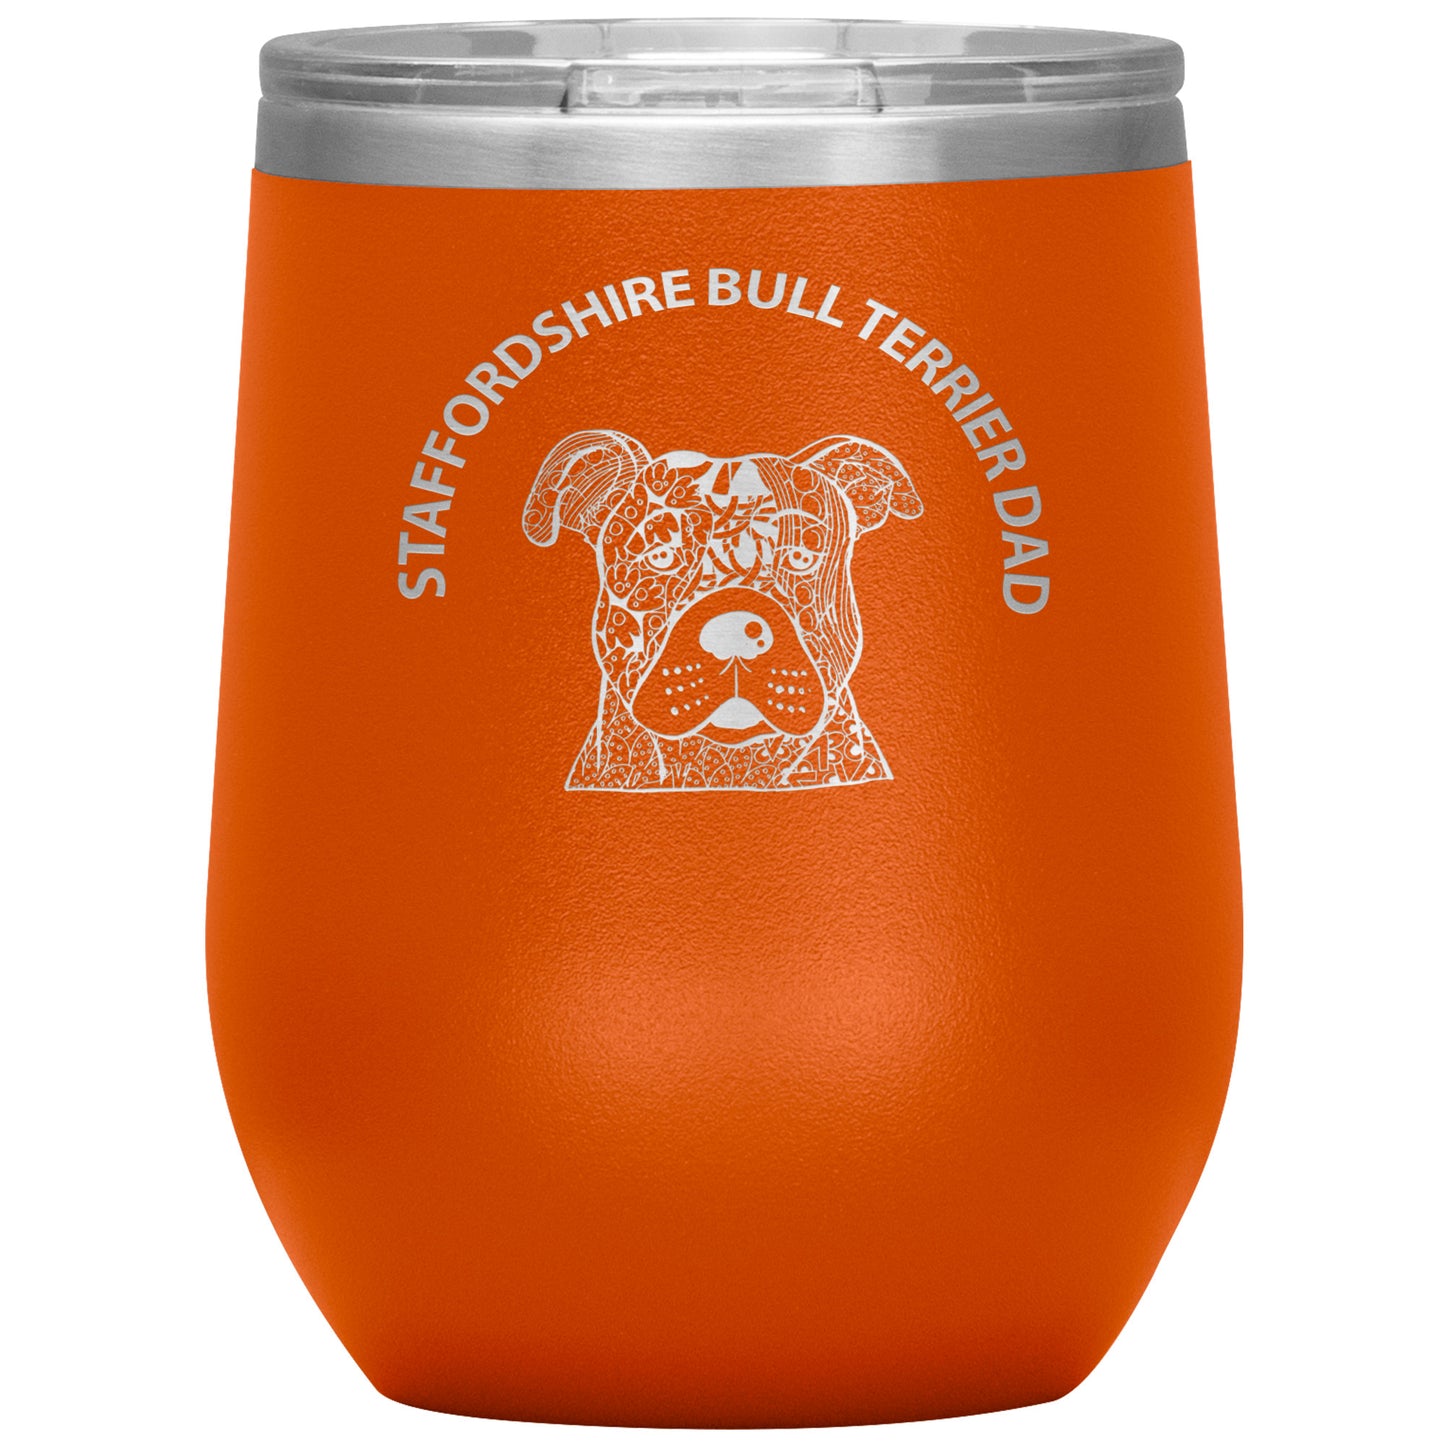 Staffordshire Bull Terrier (Staffie) Dad Design 12oz Insulated Stemless Wine Tumbler - Cindy Sang B&W